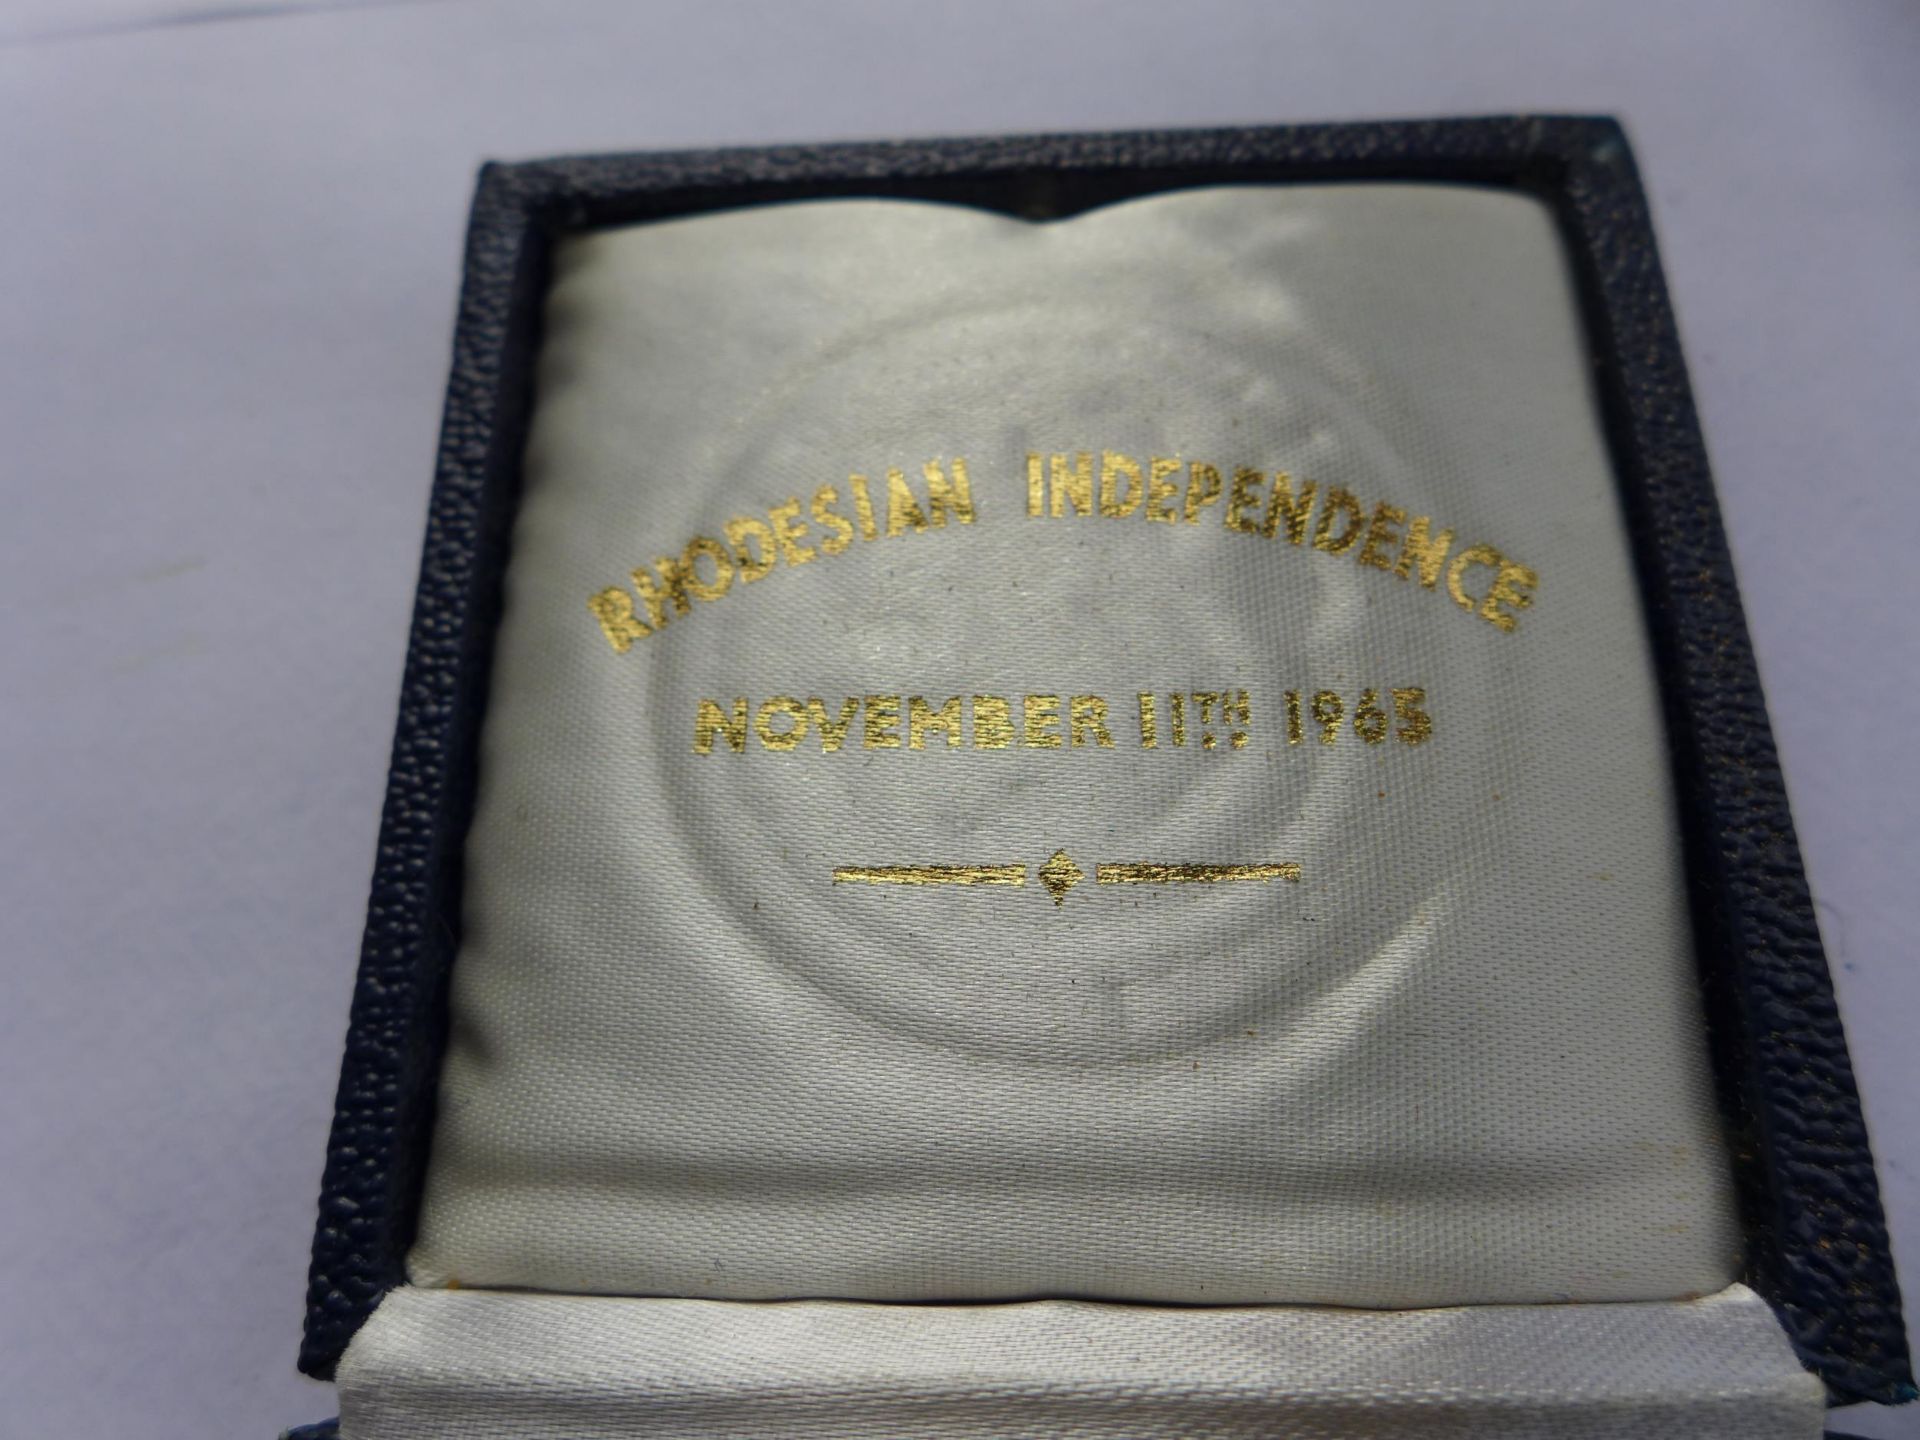 A CASED BRONZE RHODESIAN INDEPENDANCE MEDAL DATED NOVEMBER 11TH 1965, 37MM - Image 2 of 4